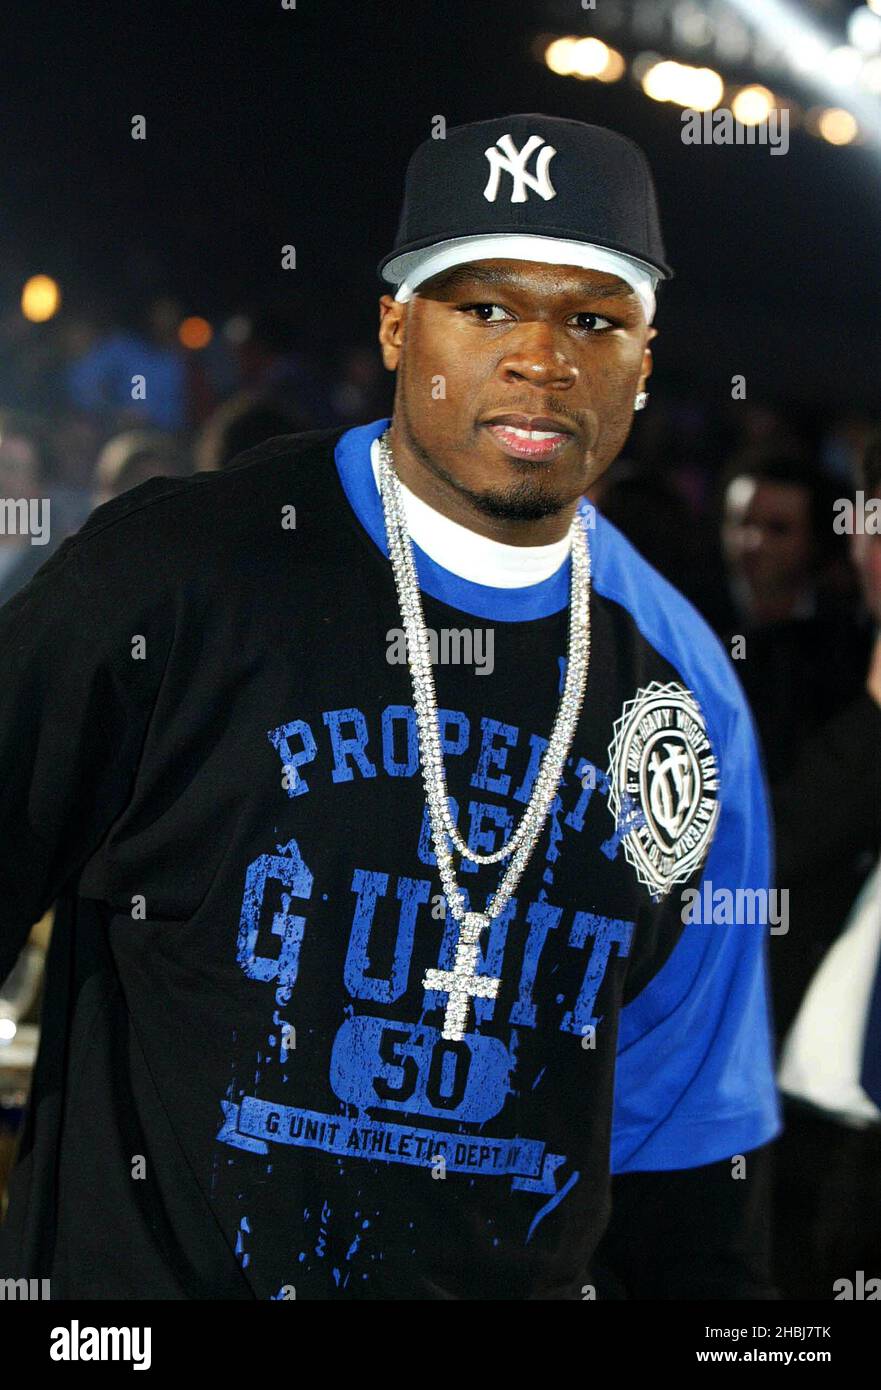 50 Cent at the 2004 Brits Awards. Stock Photo